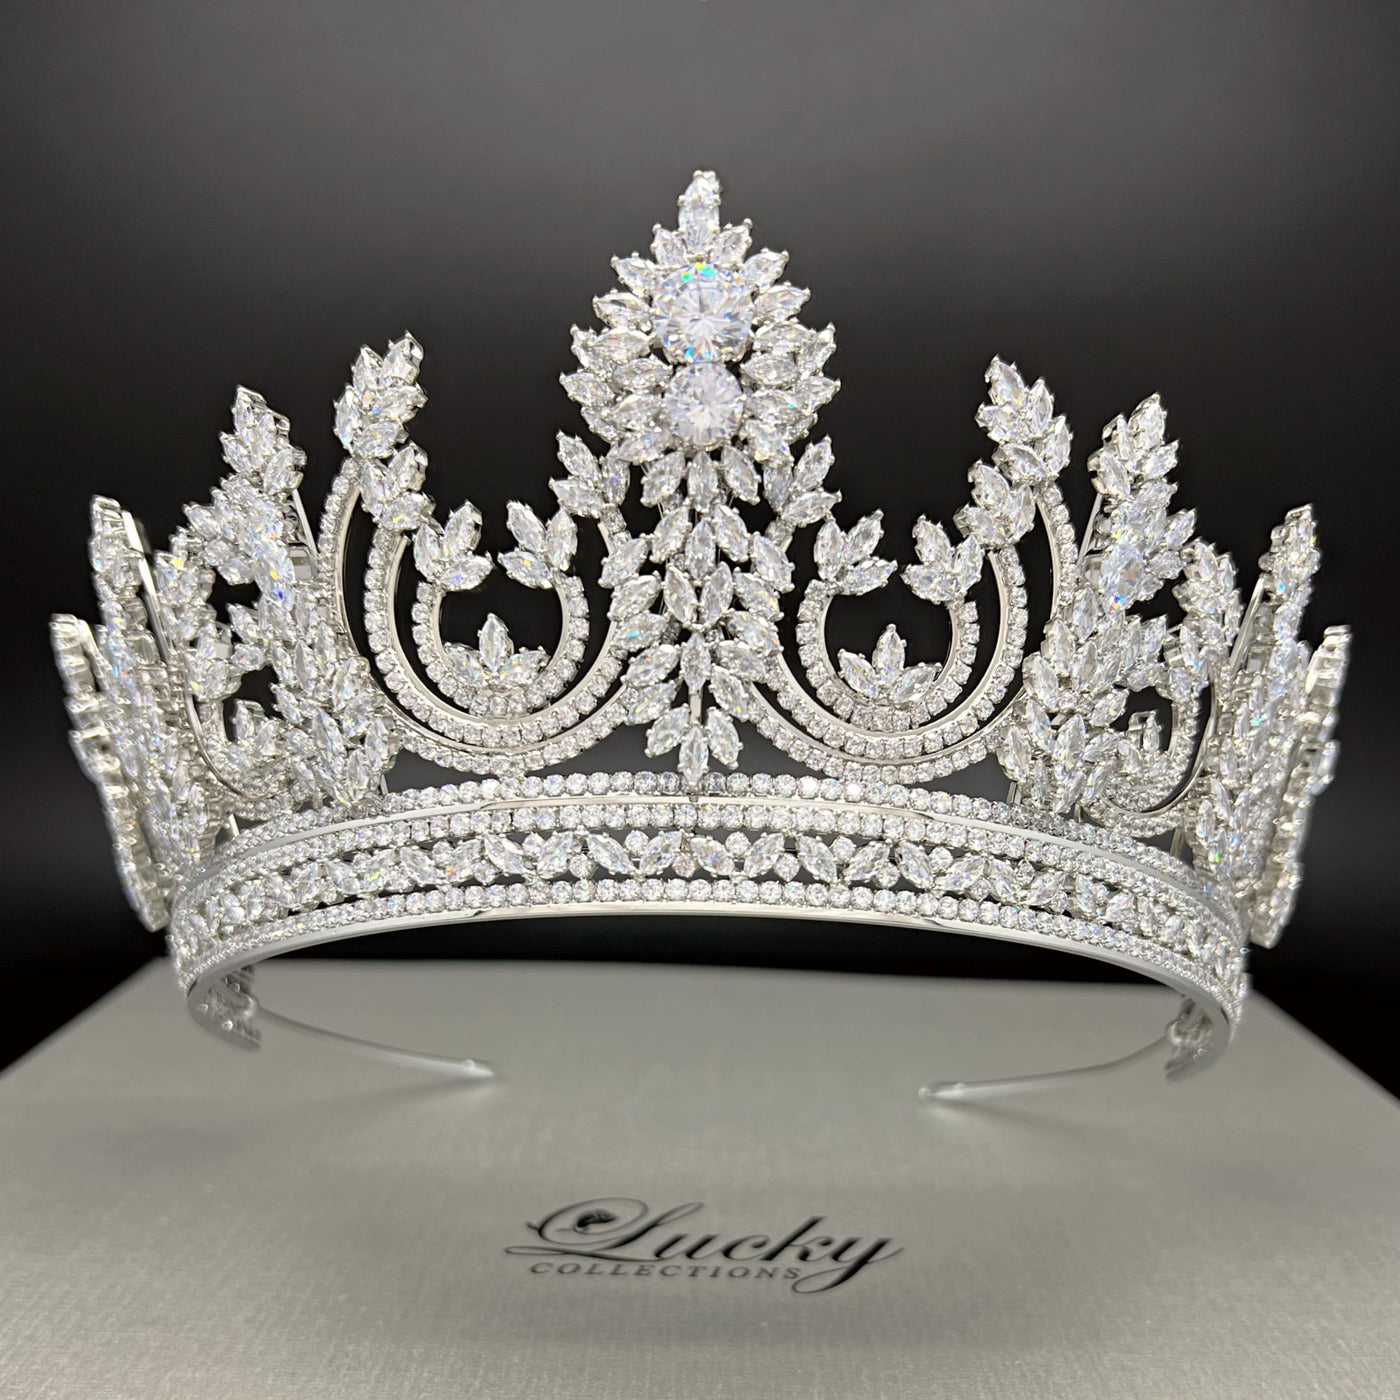 Tiara, Zirconia, Unique design  with High Quality CZ by Lucky Collections ™